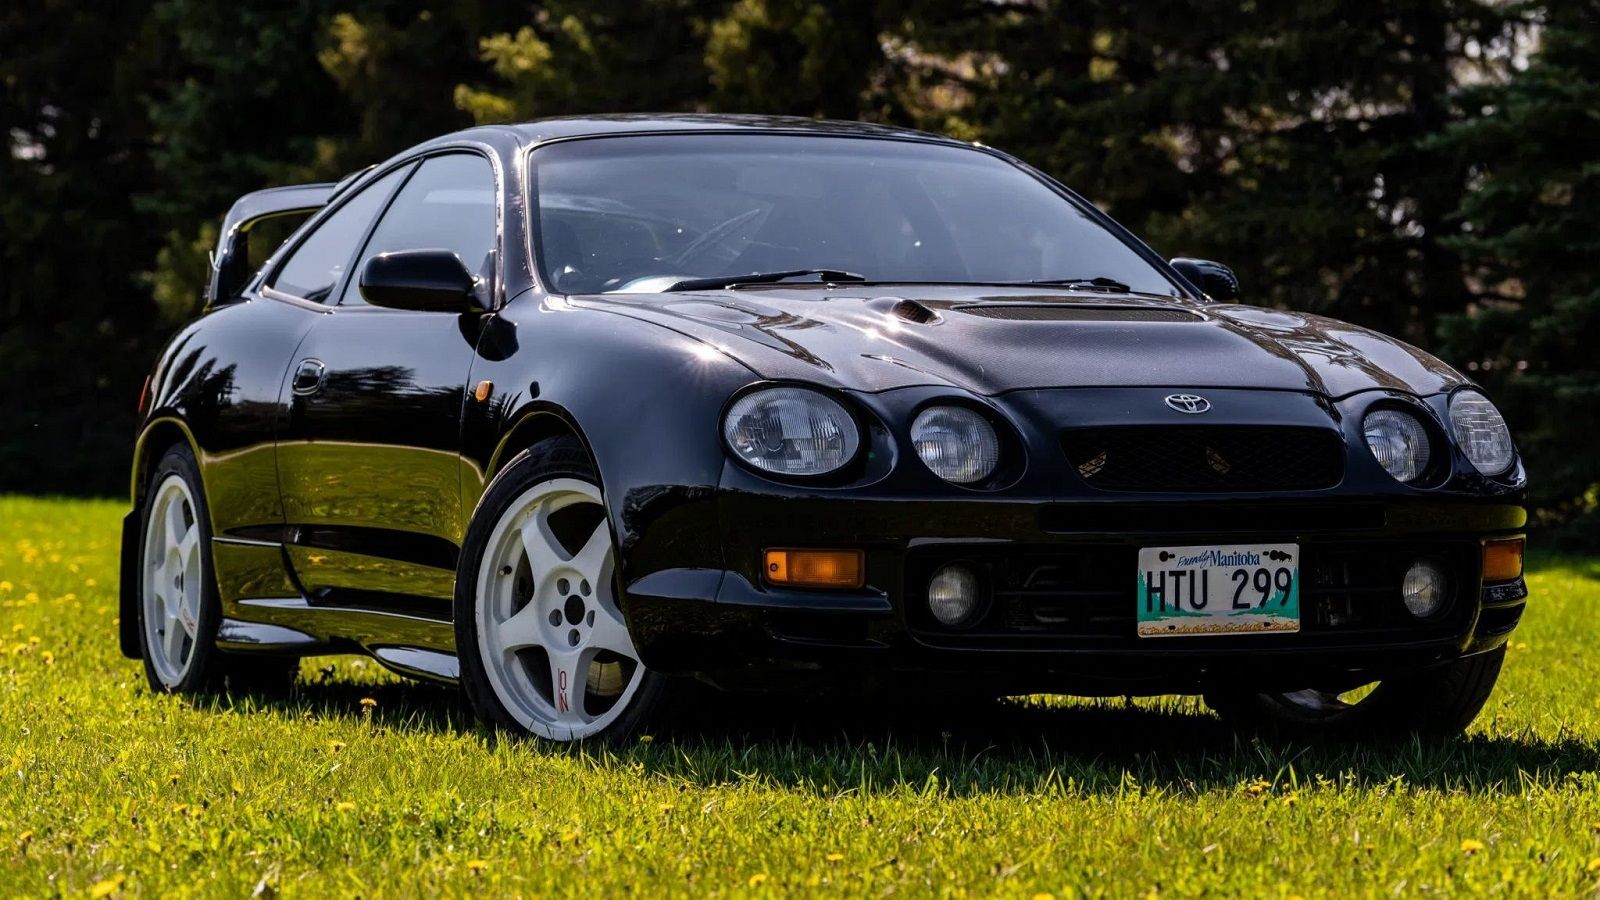 Evolution of Toyota Sports Cars: From Past to Present